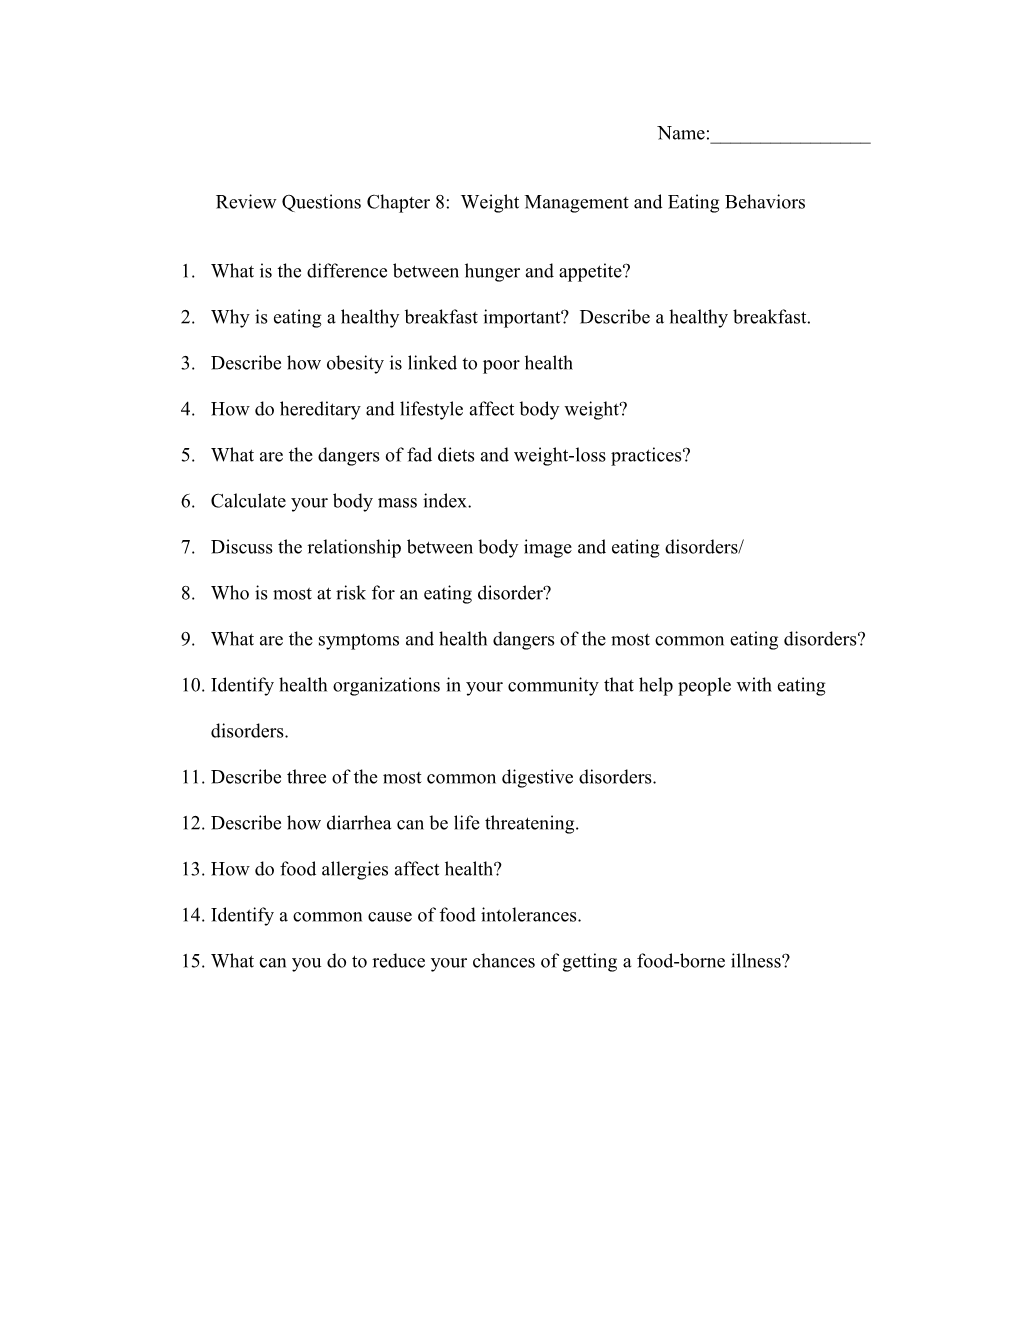 Review Questions Chapter 8: Weight Management and Eating Behaviors